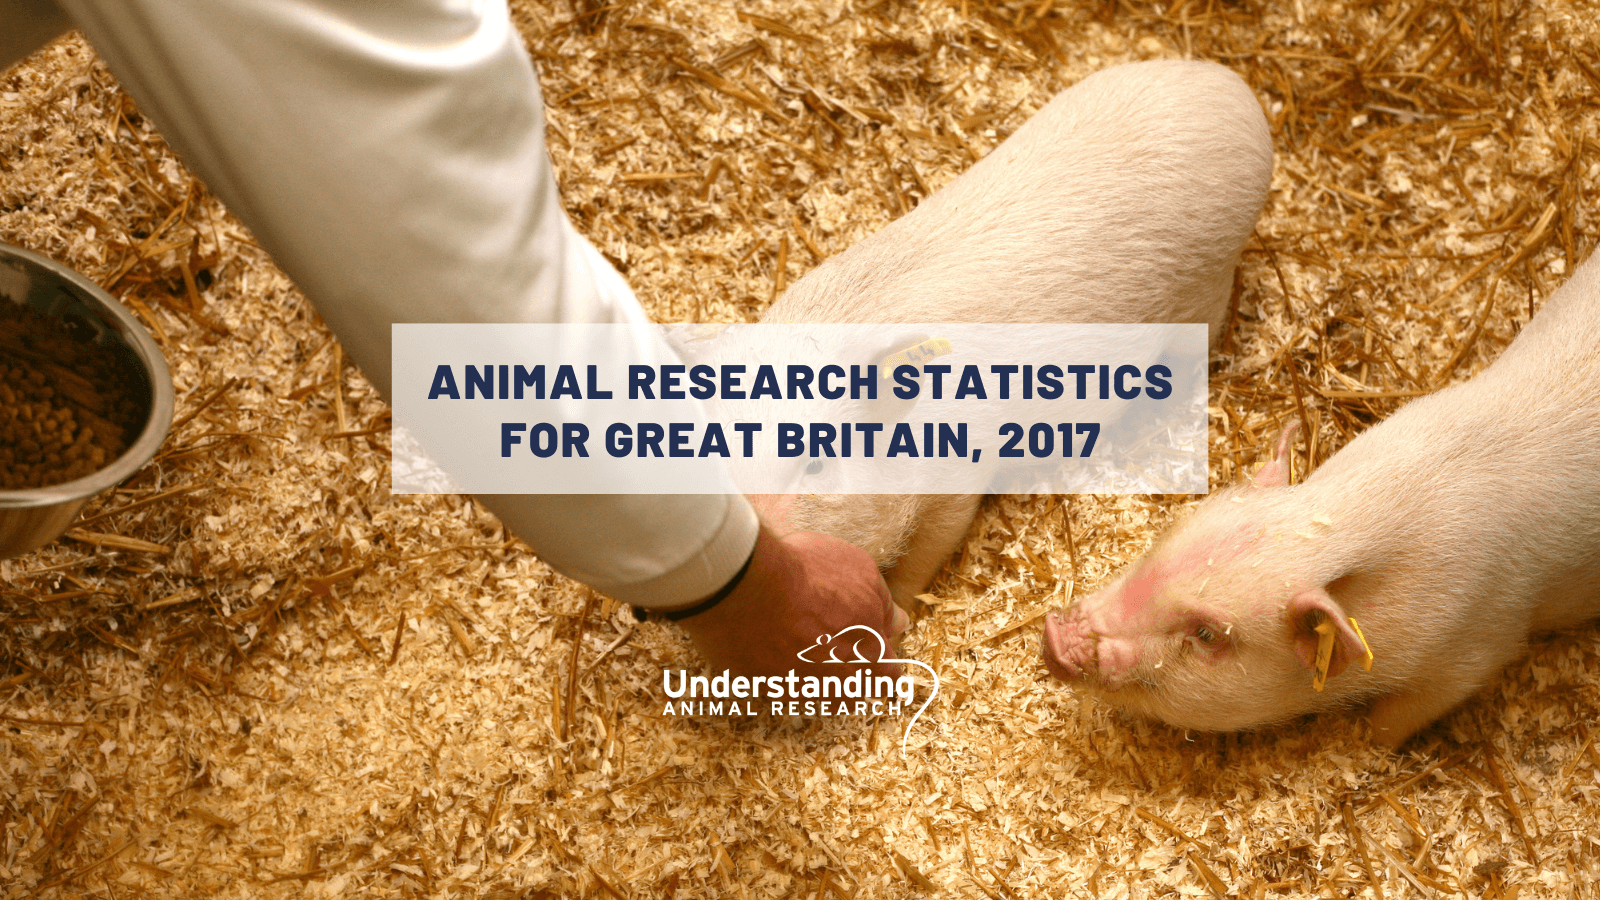 Animal research statistics for Great Britain, 2017